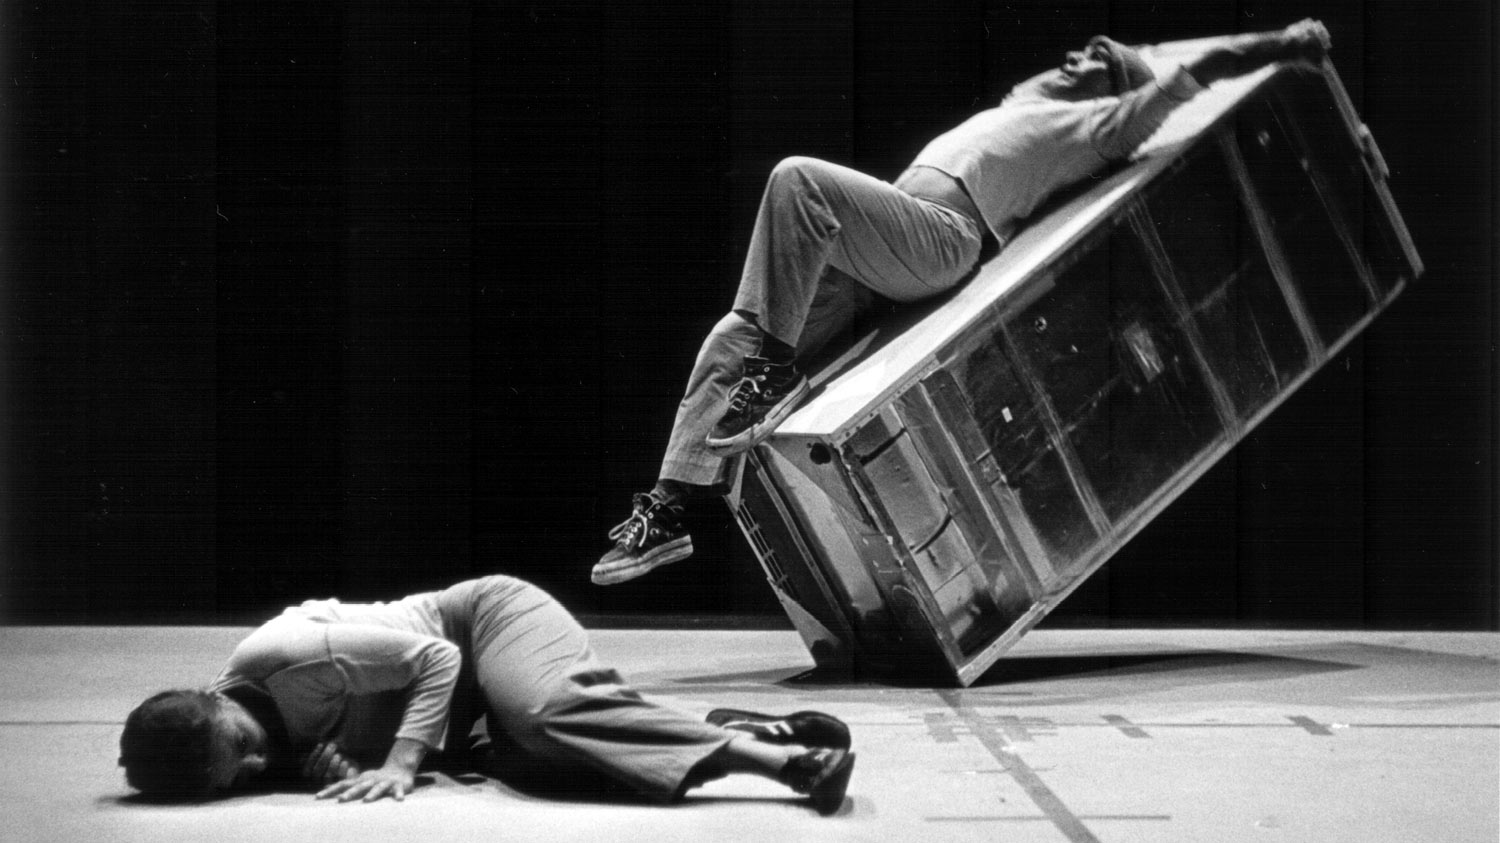 A woman lying upstage of a man laying across a refrigerator at a 45 degree angle about to tip over. 